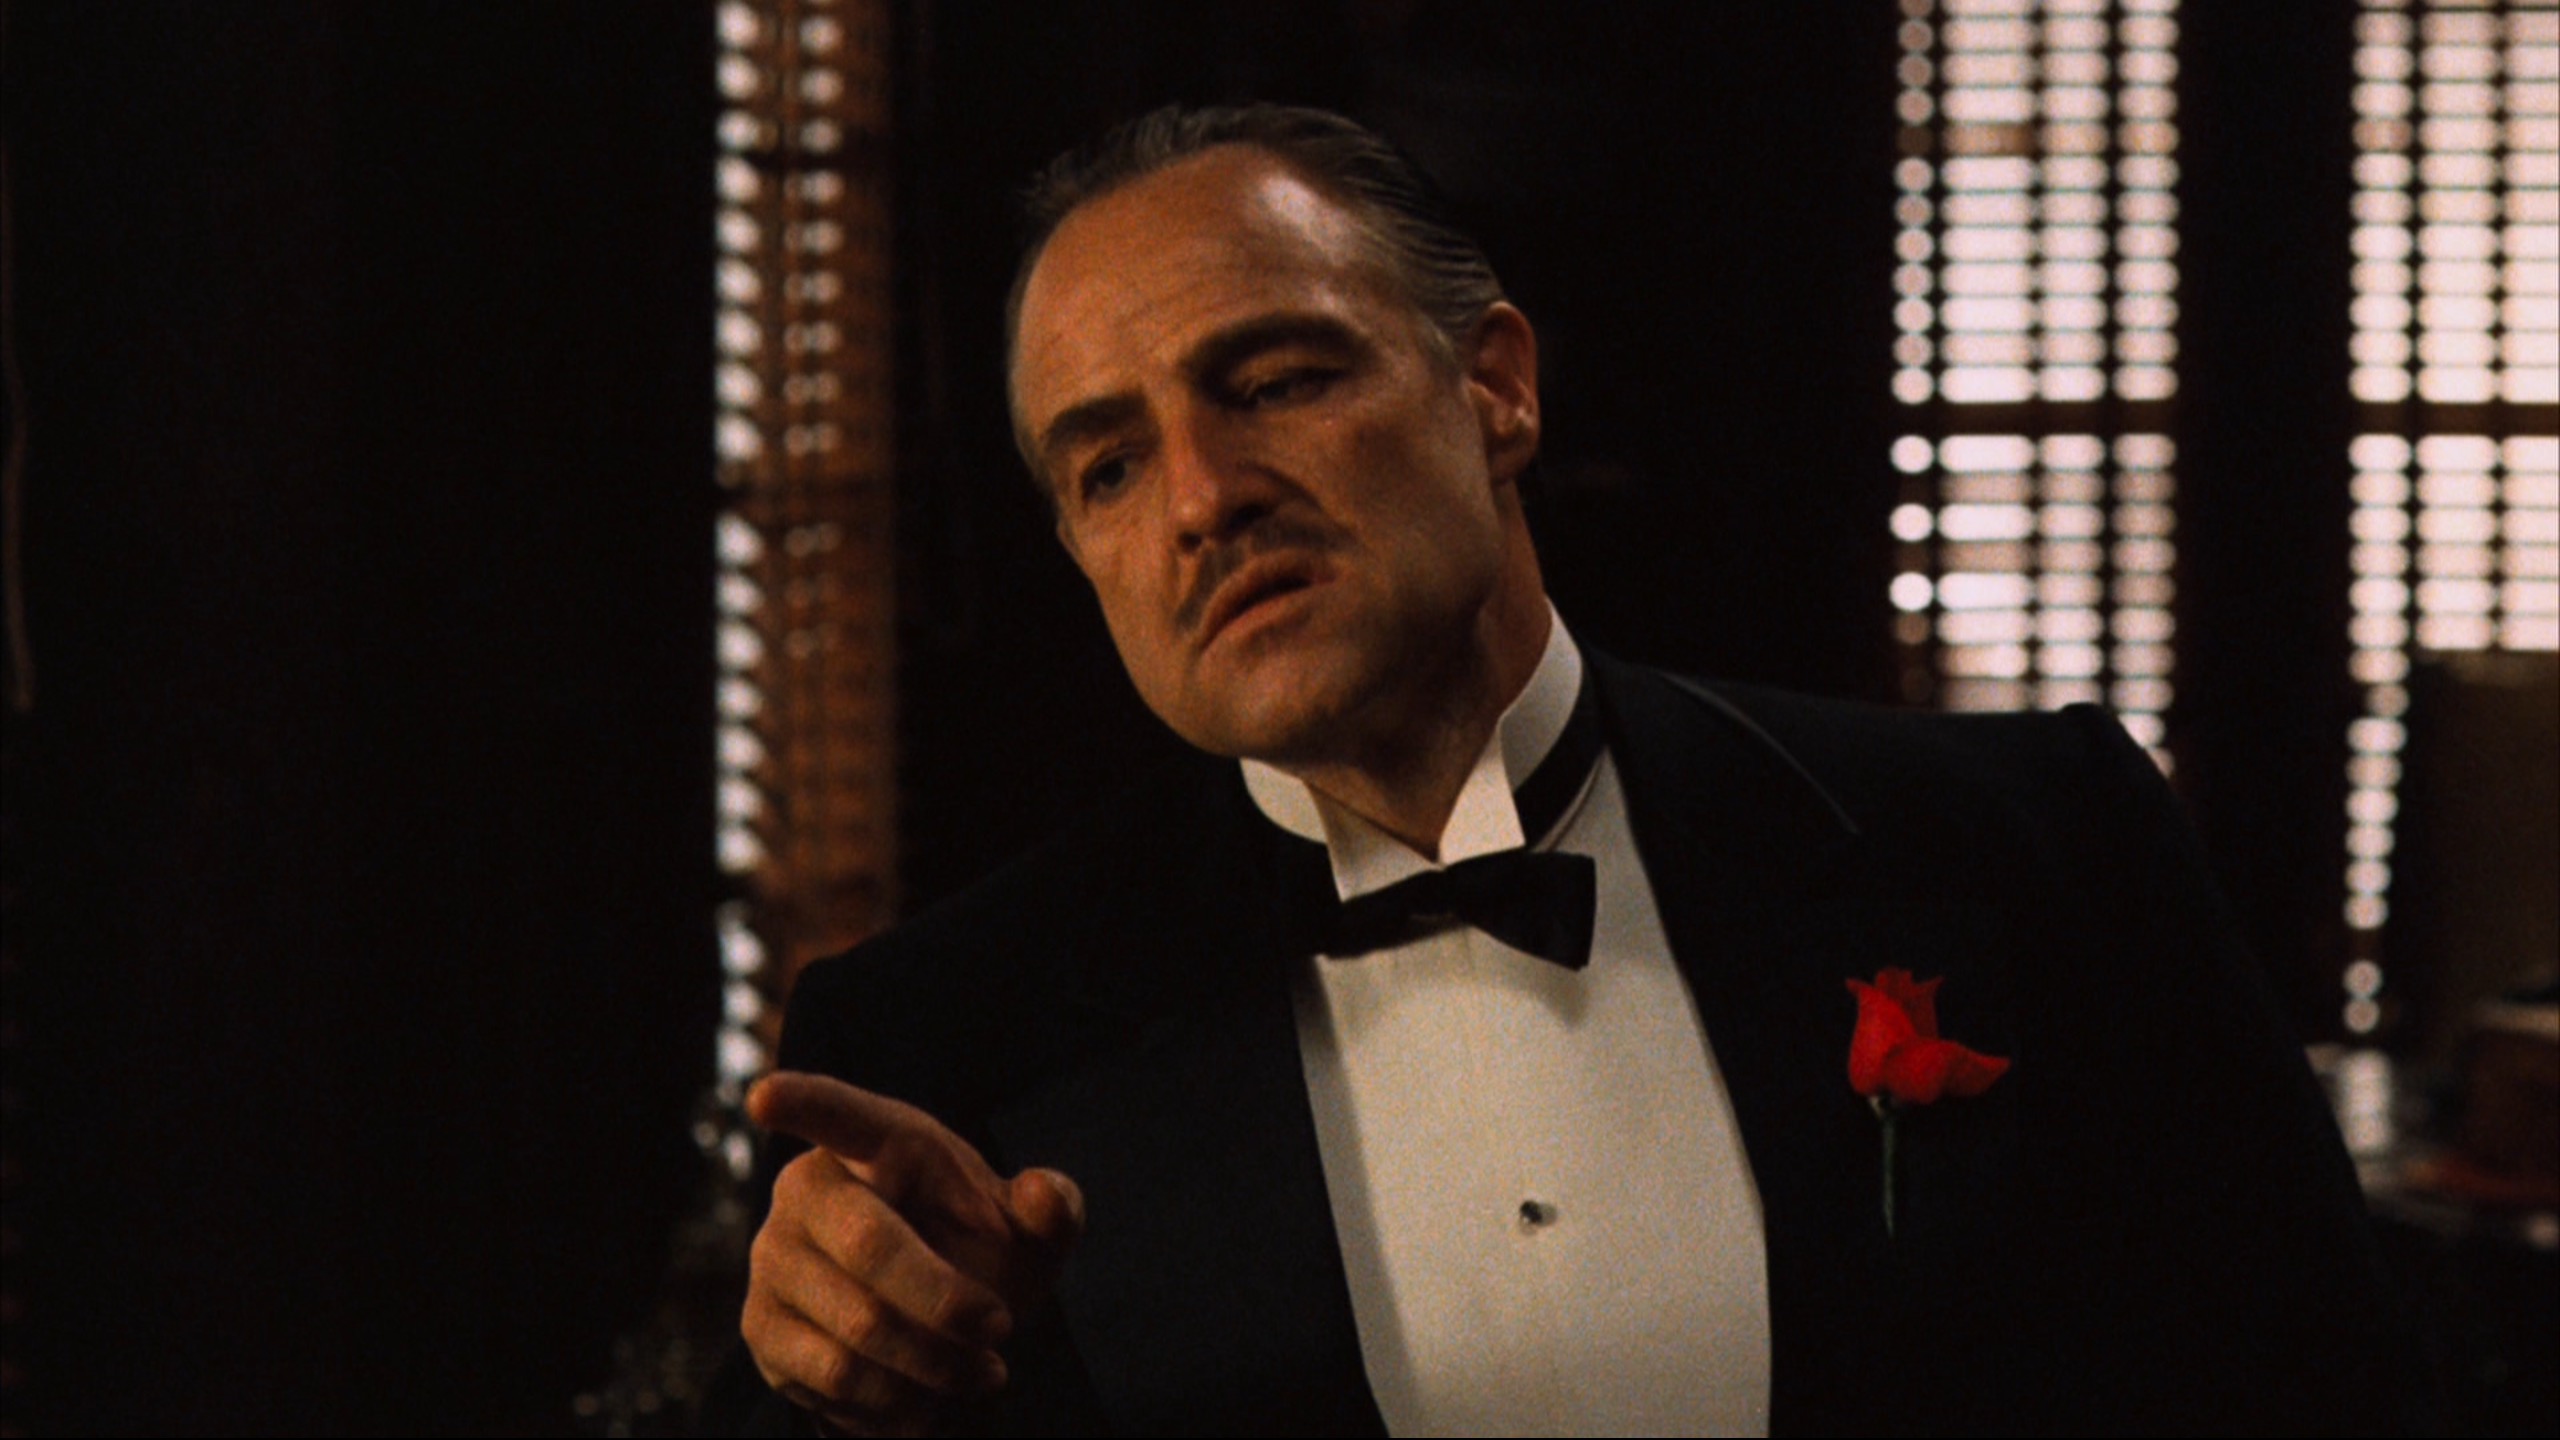 betrayal in the godfather 1